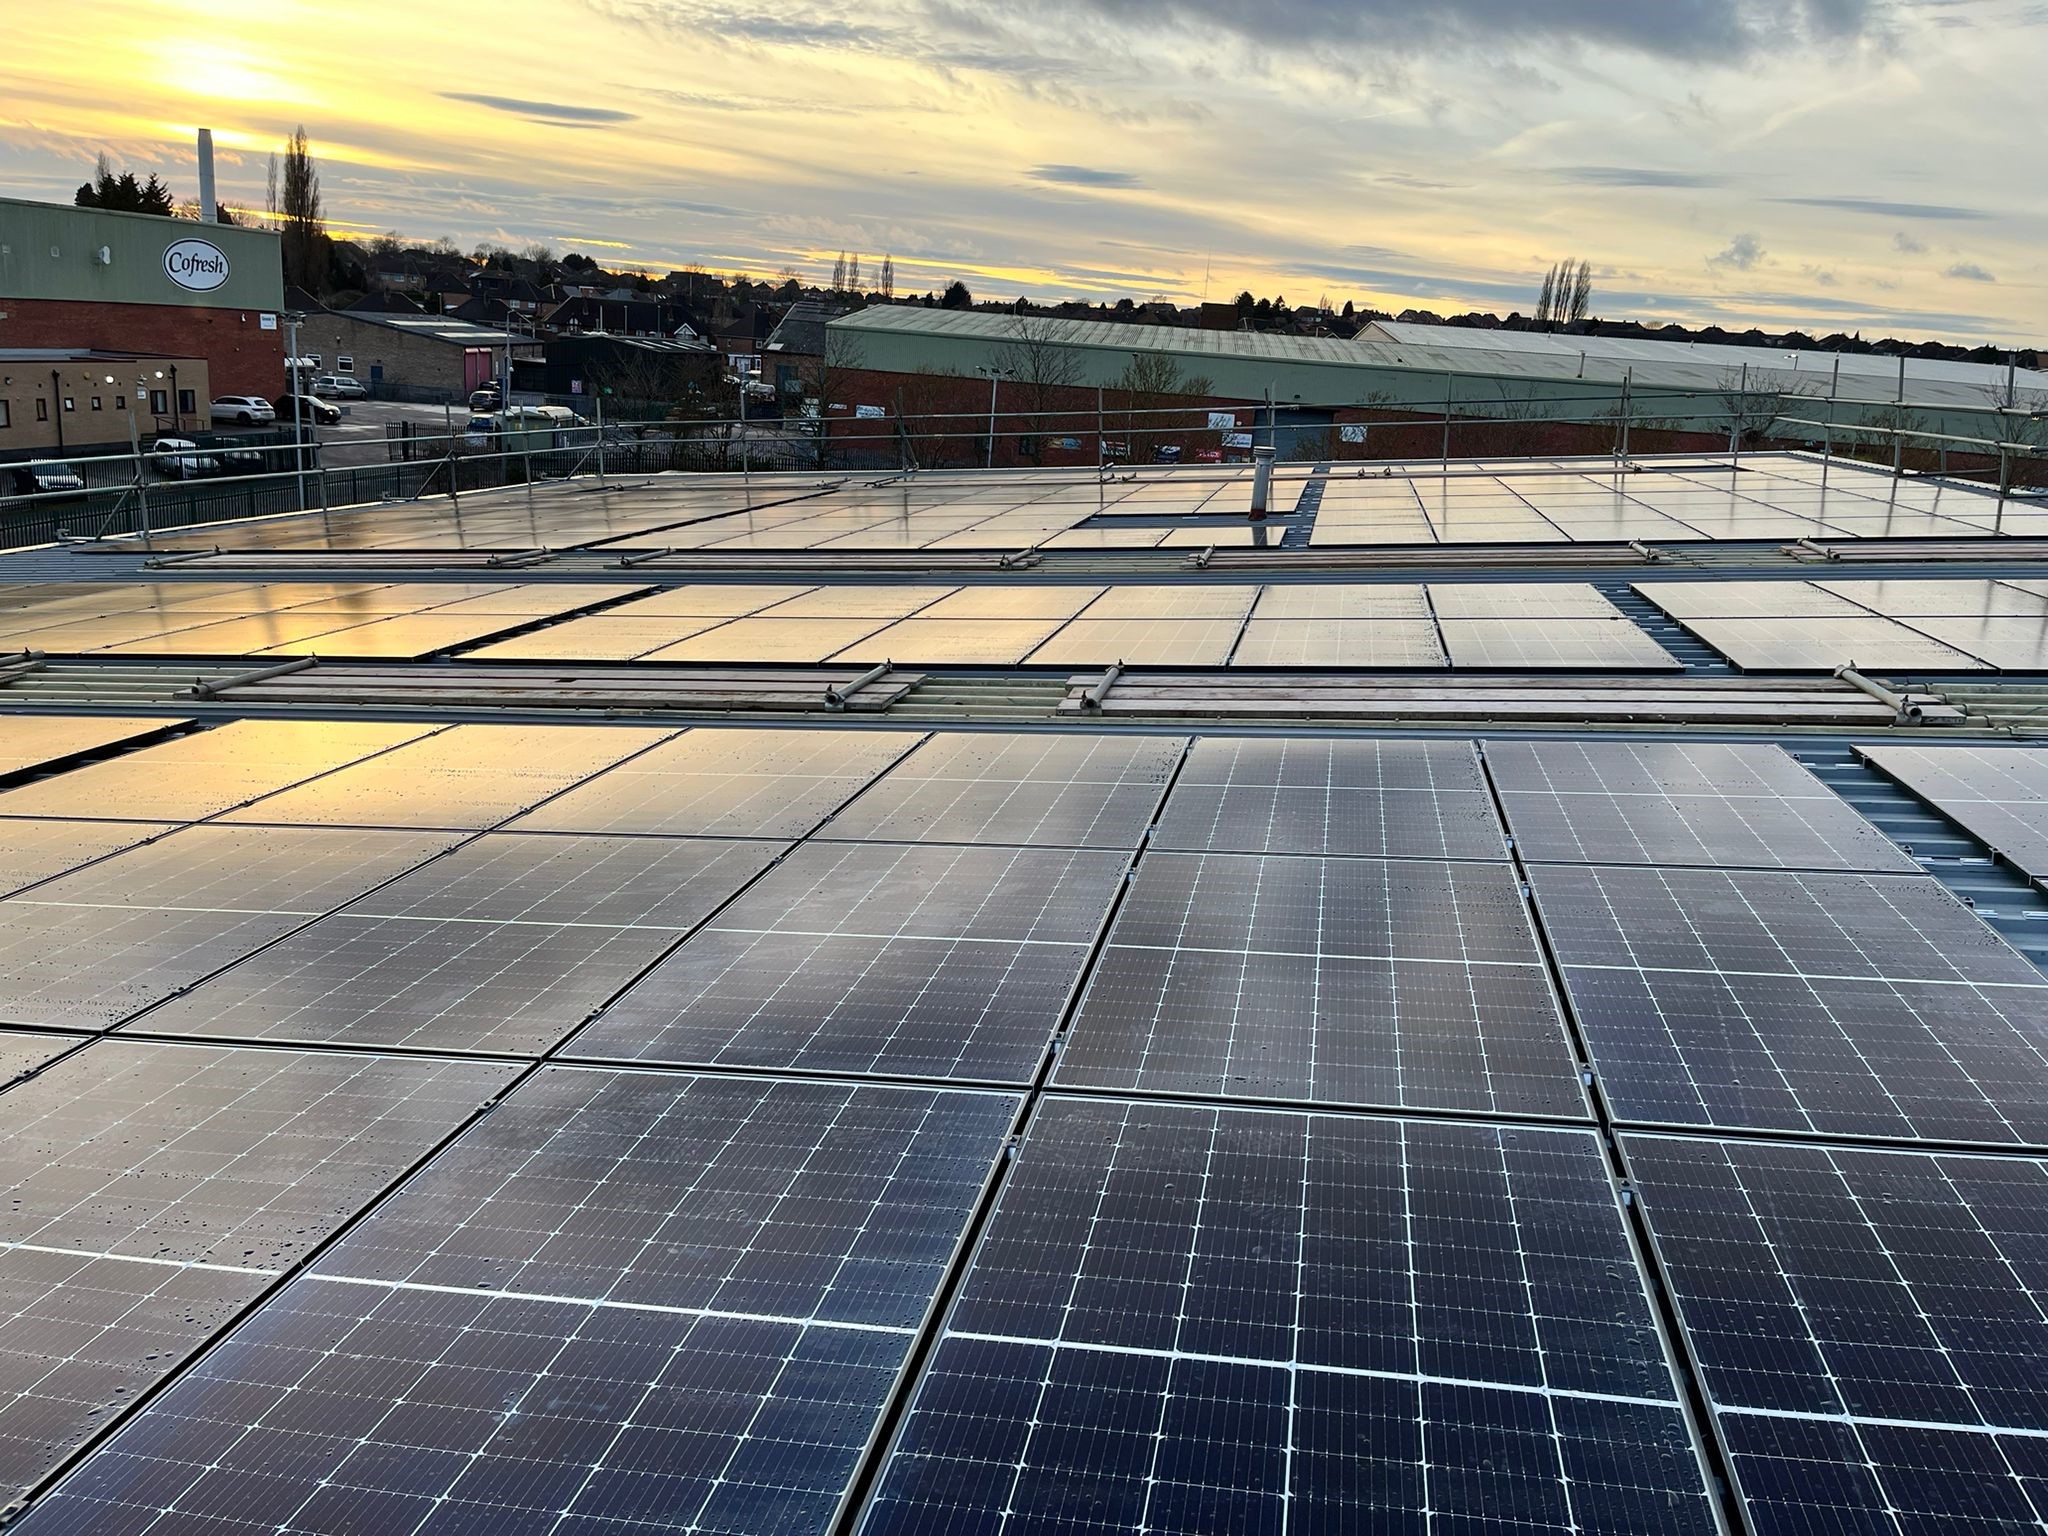 First invests £2.5m in solar panels